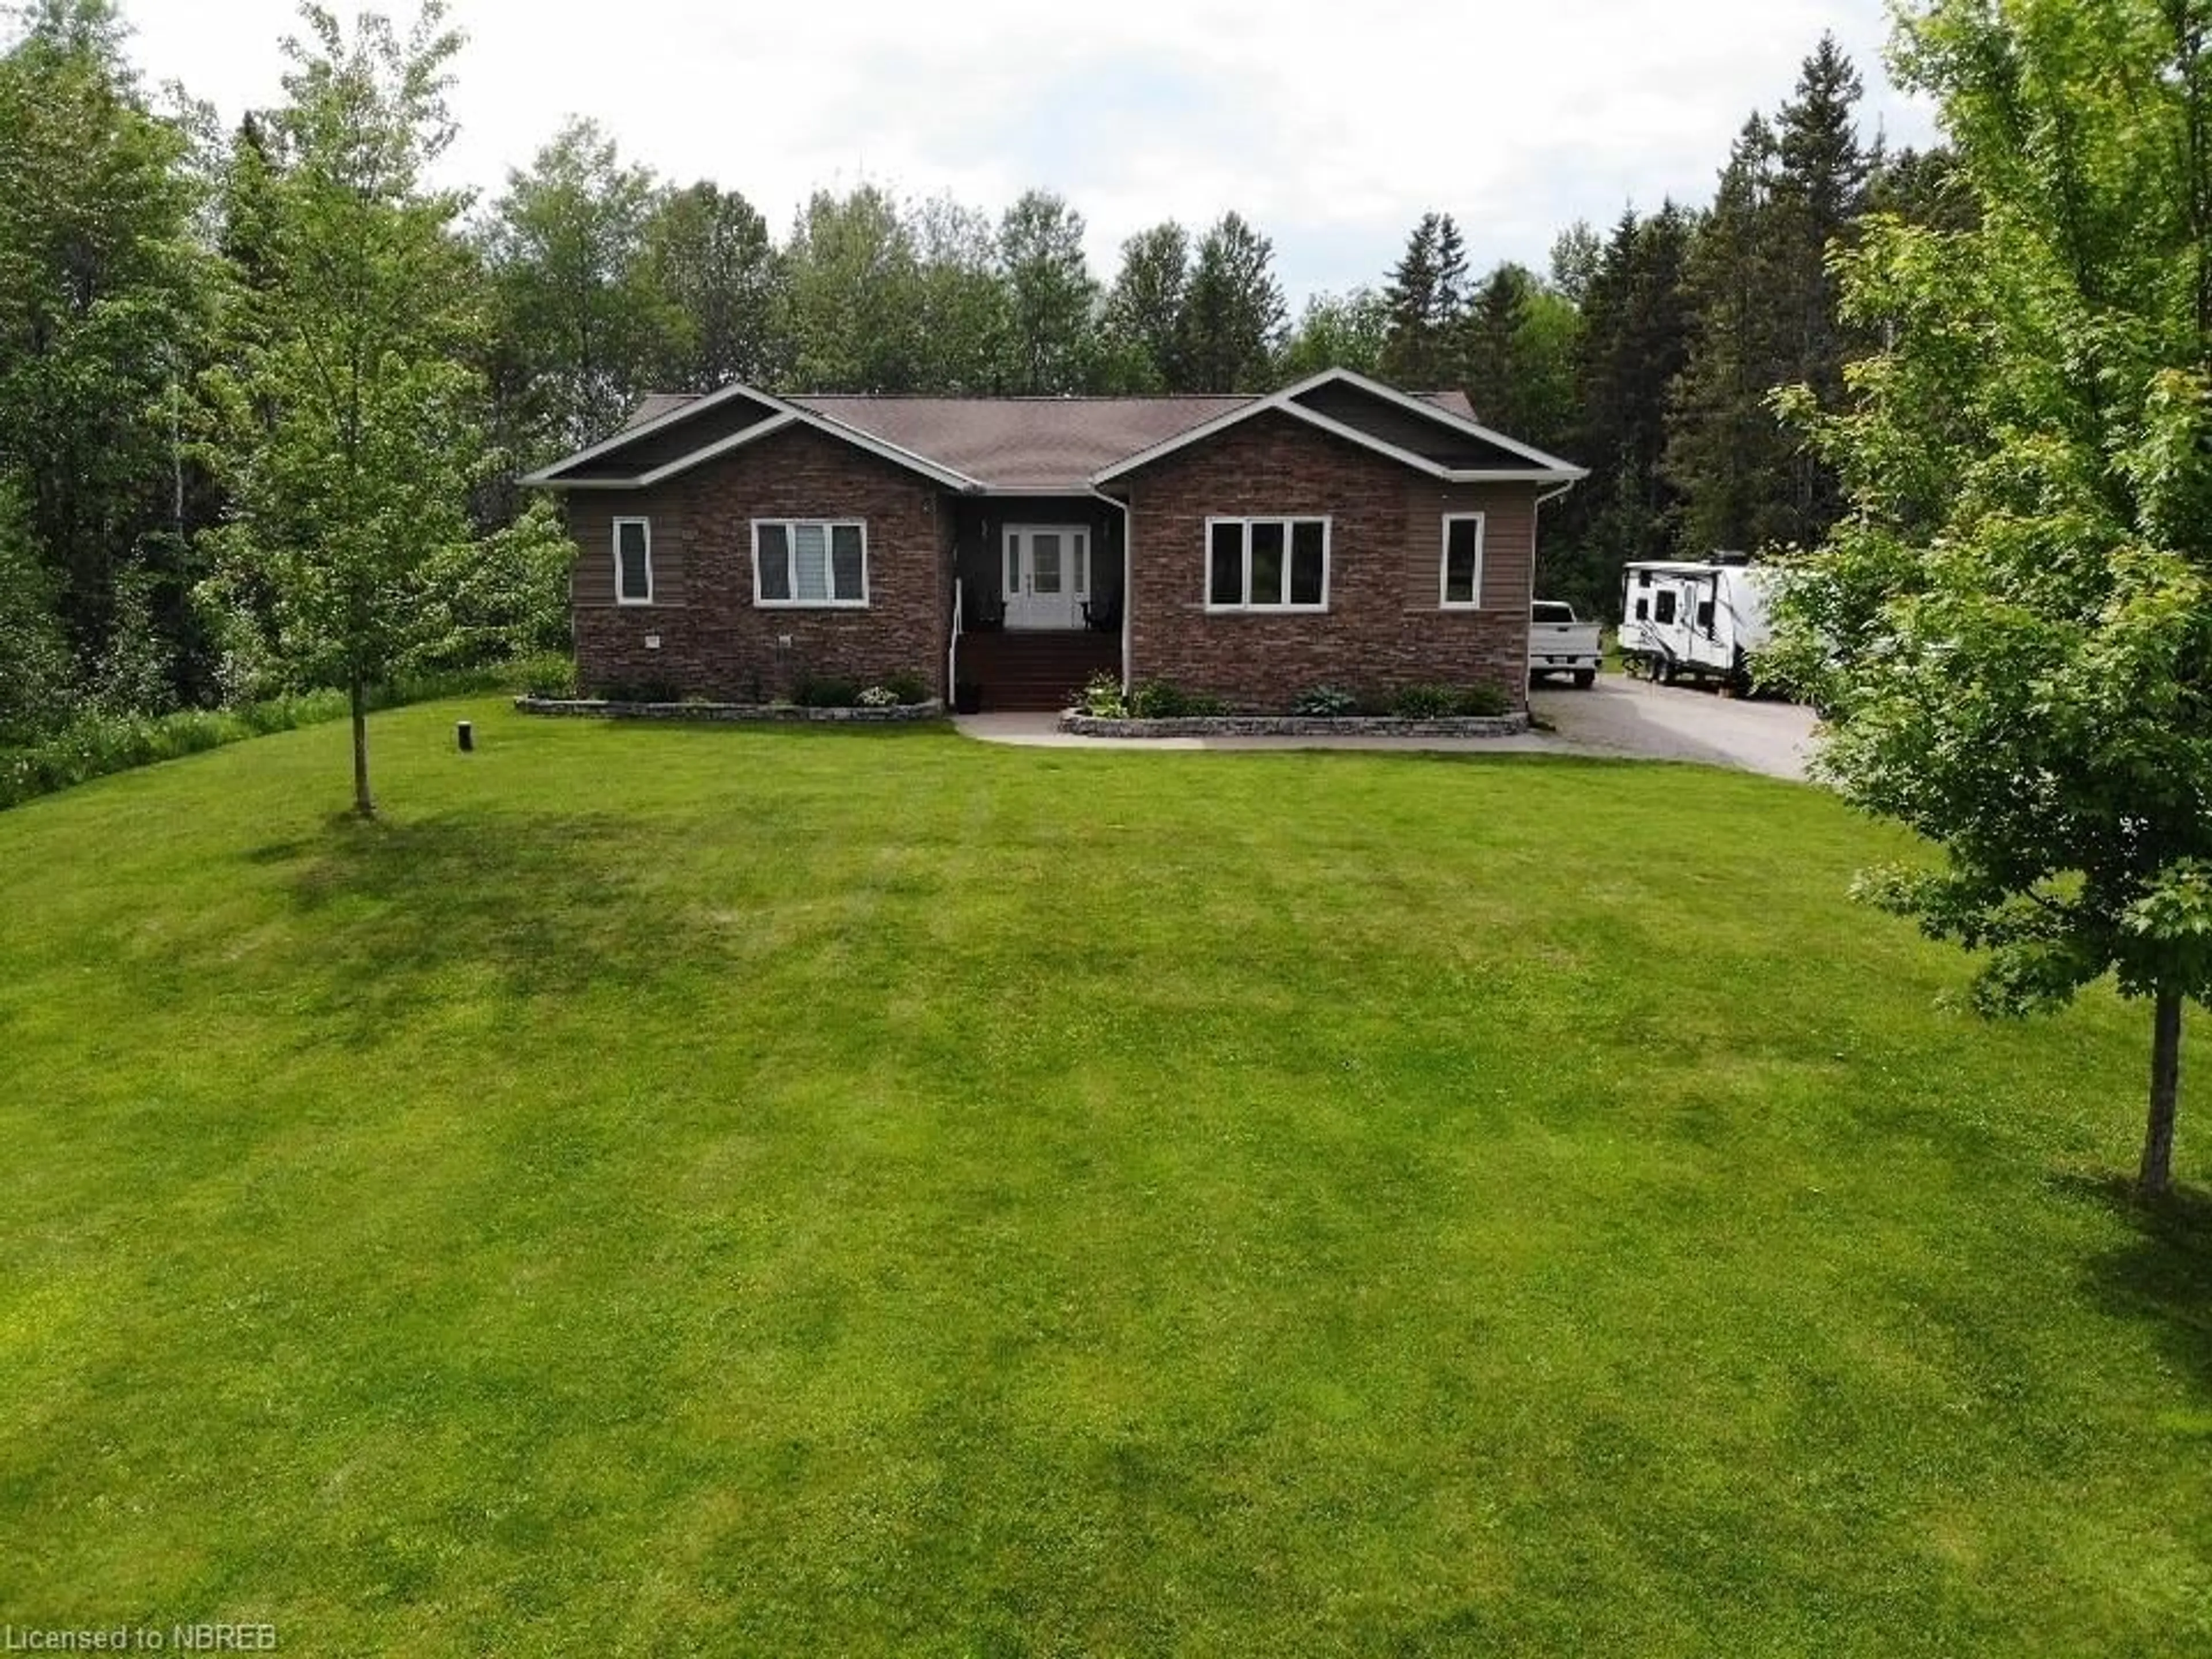 Outside view for 805 Evansville Dr, Sturgeon Falls Ontario P2B 2K5